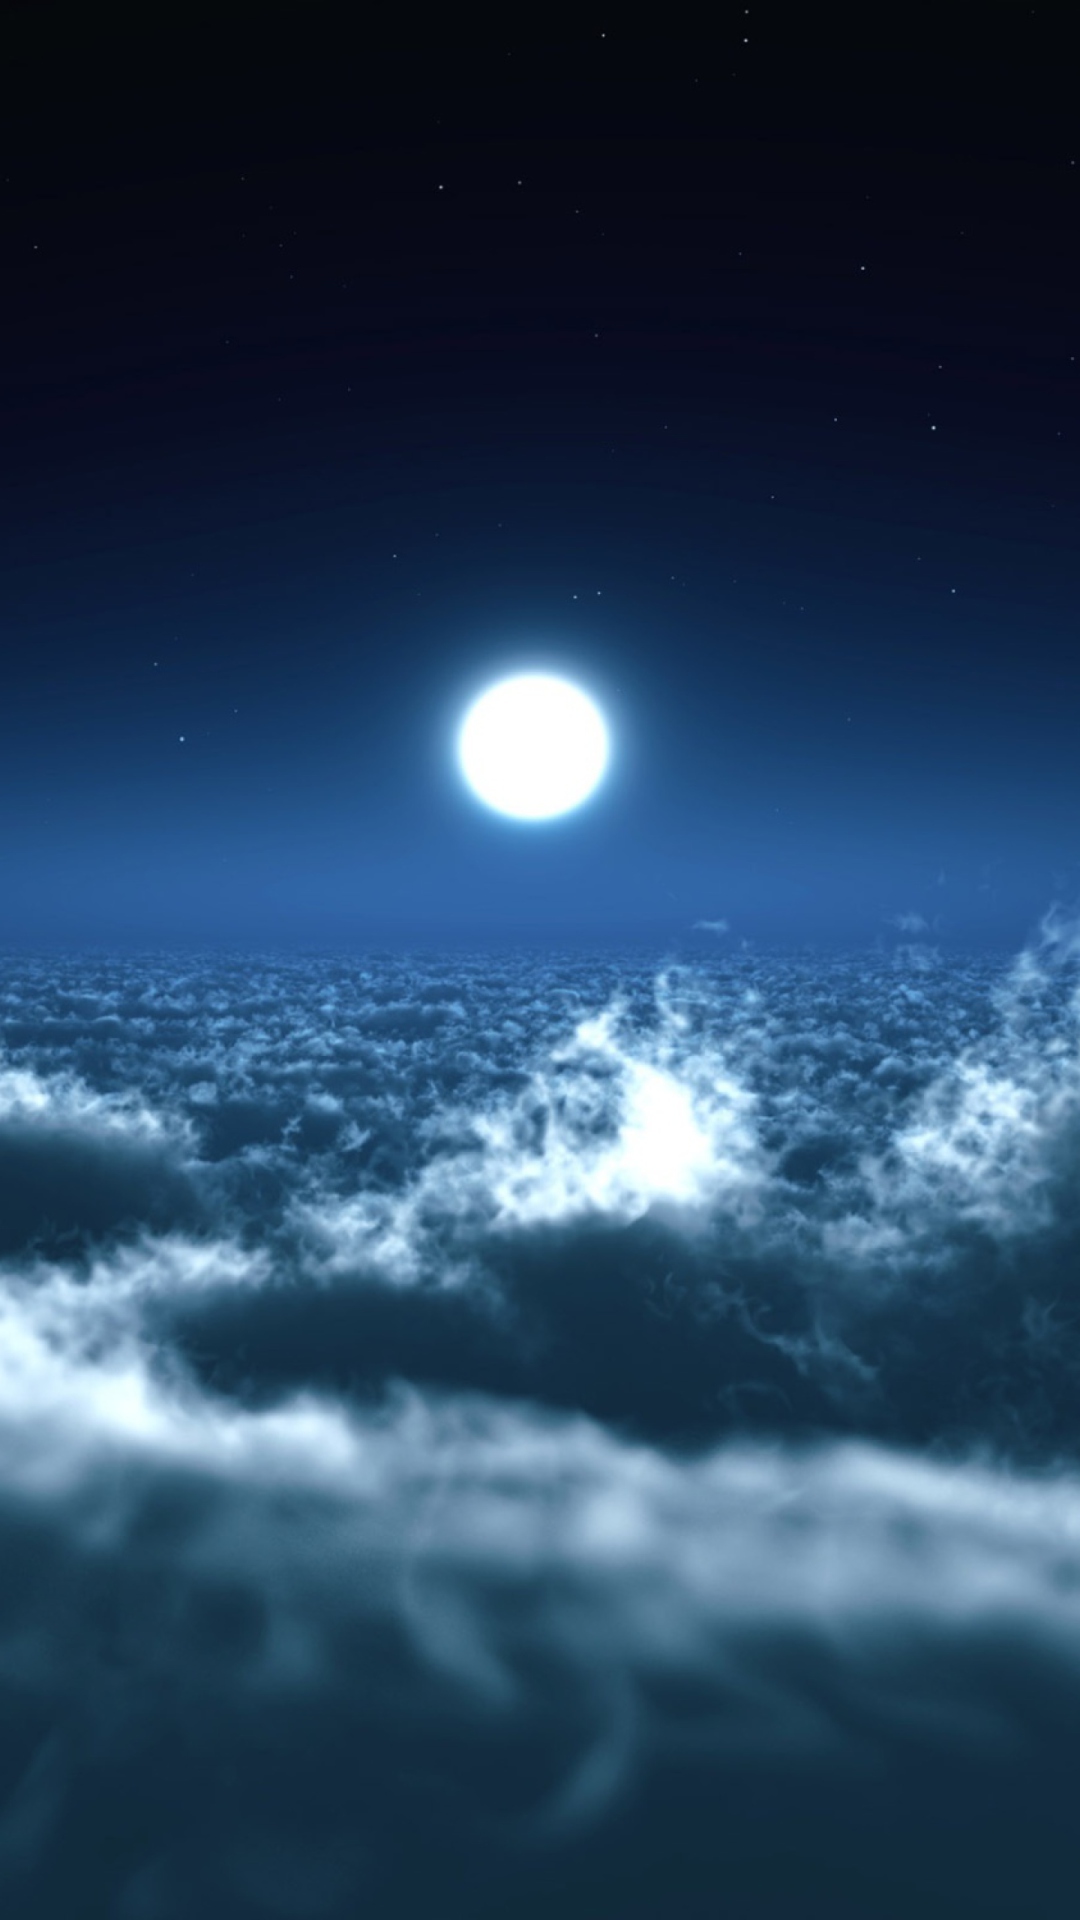 Moon Over Clouds wallpaper 1080x1920